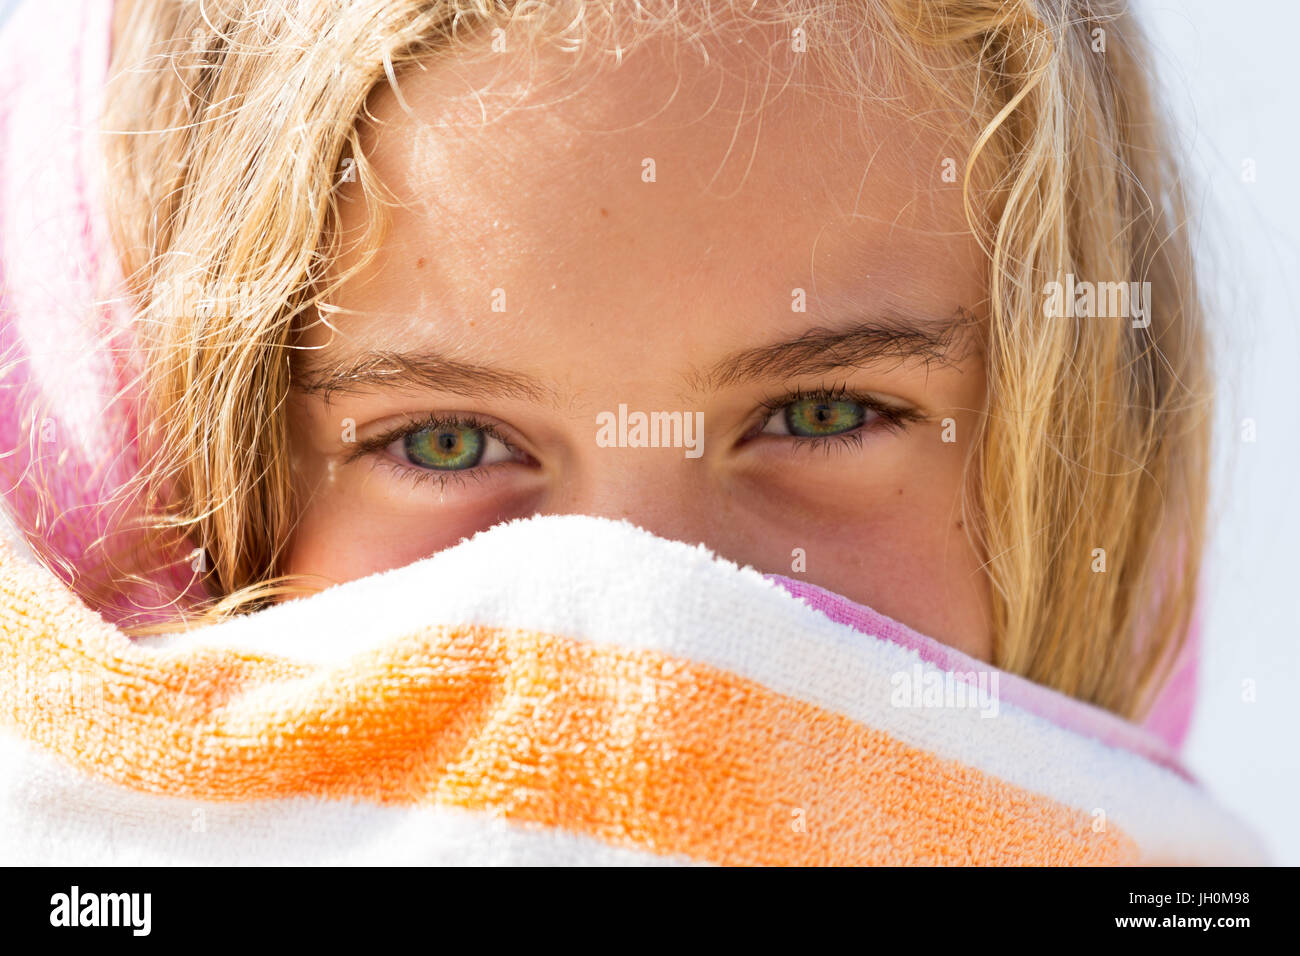 A vibrantly healthy young girl hides her cheeky smile behind a towel while on holidays at the beach. Stock Photo